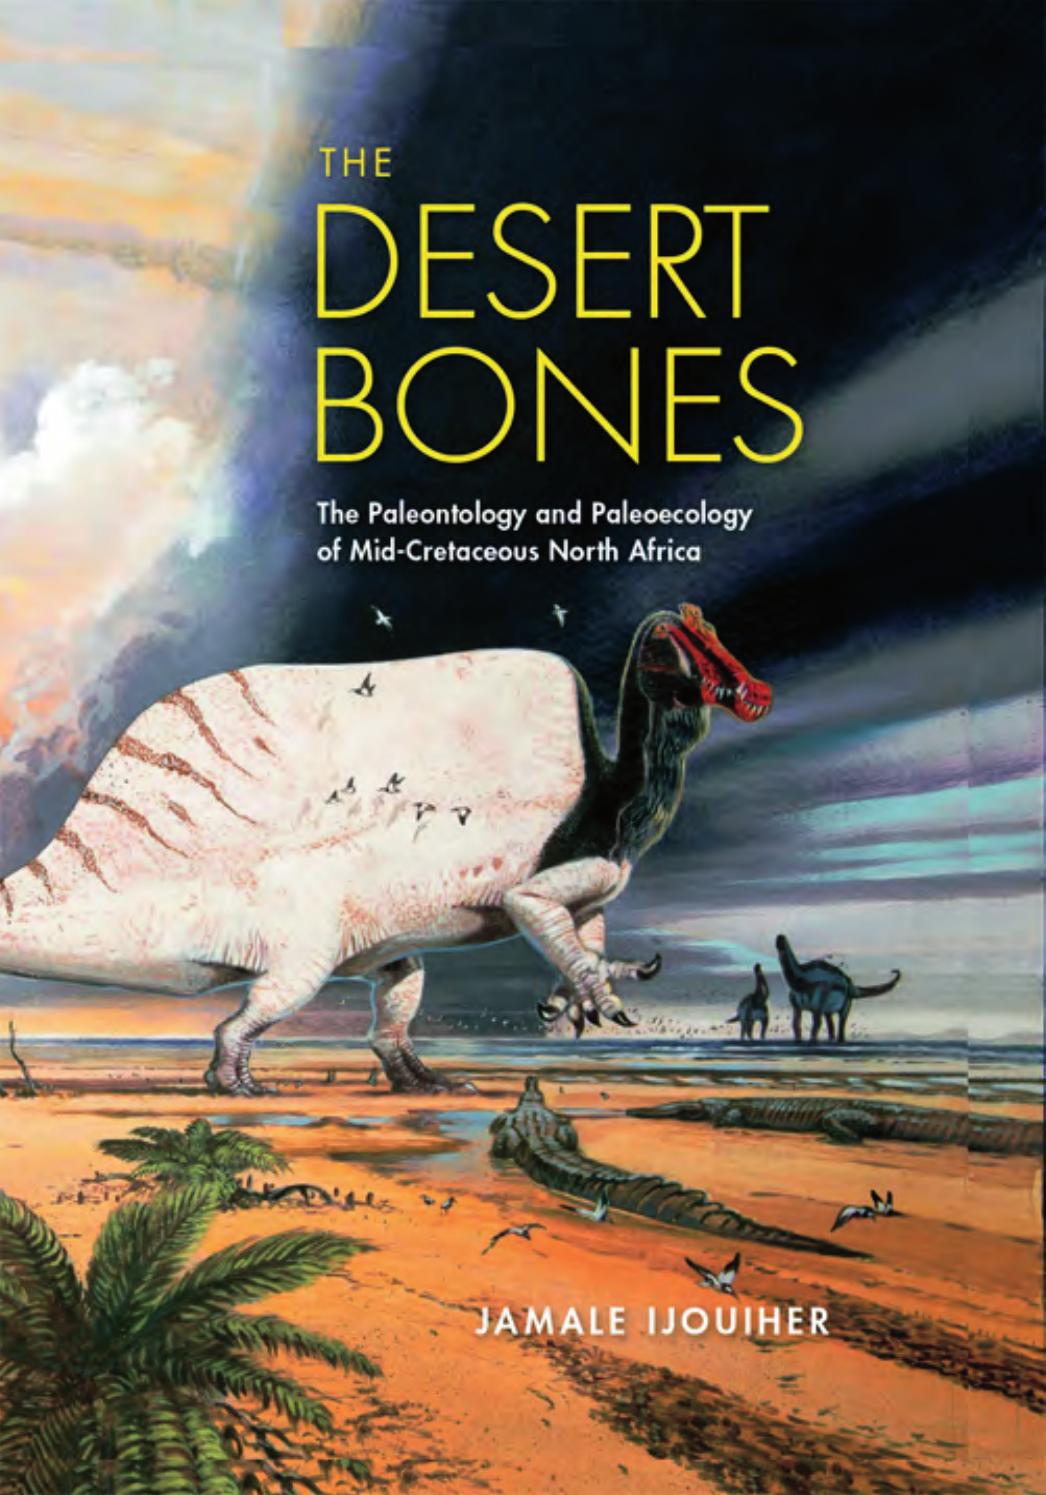 The Desert Bones: The Paleontology and Paleoecology of Mid-Cretaceous North Africa by Jamale Ijouiher